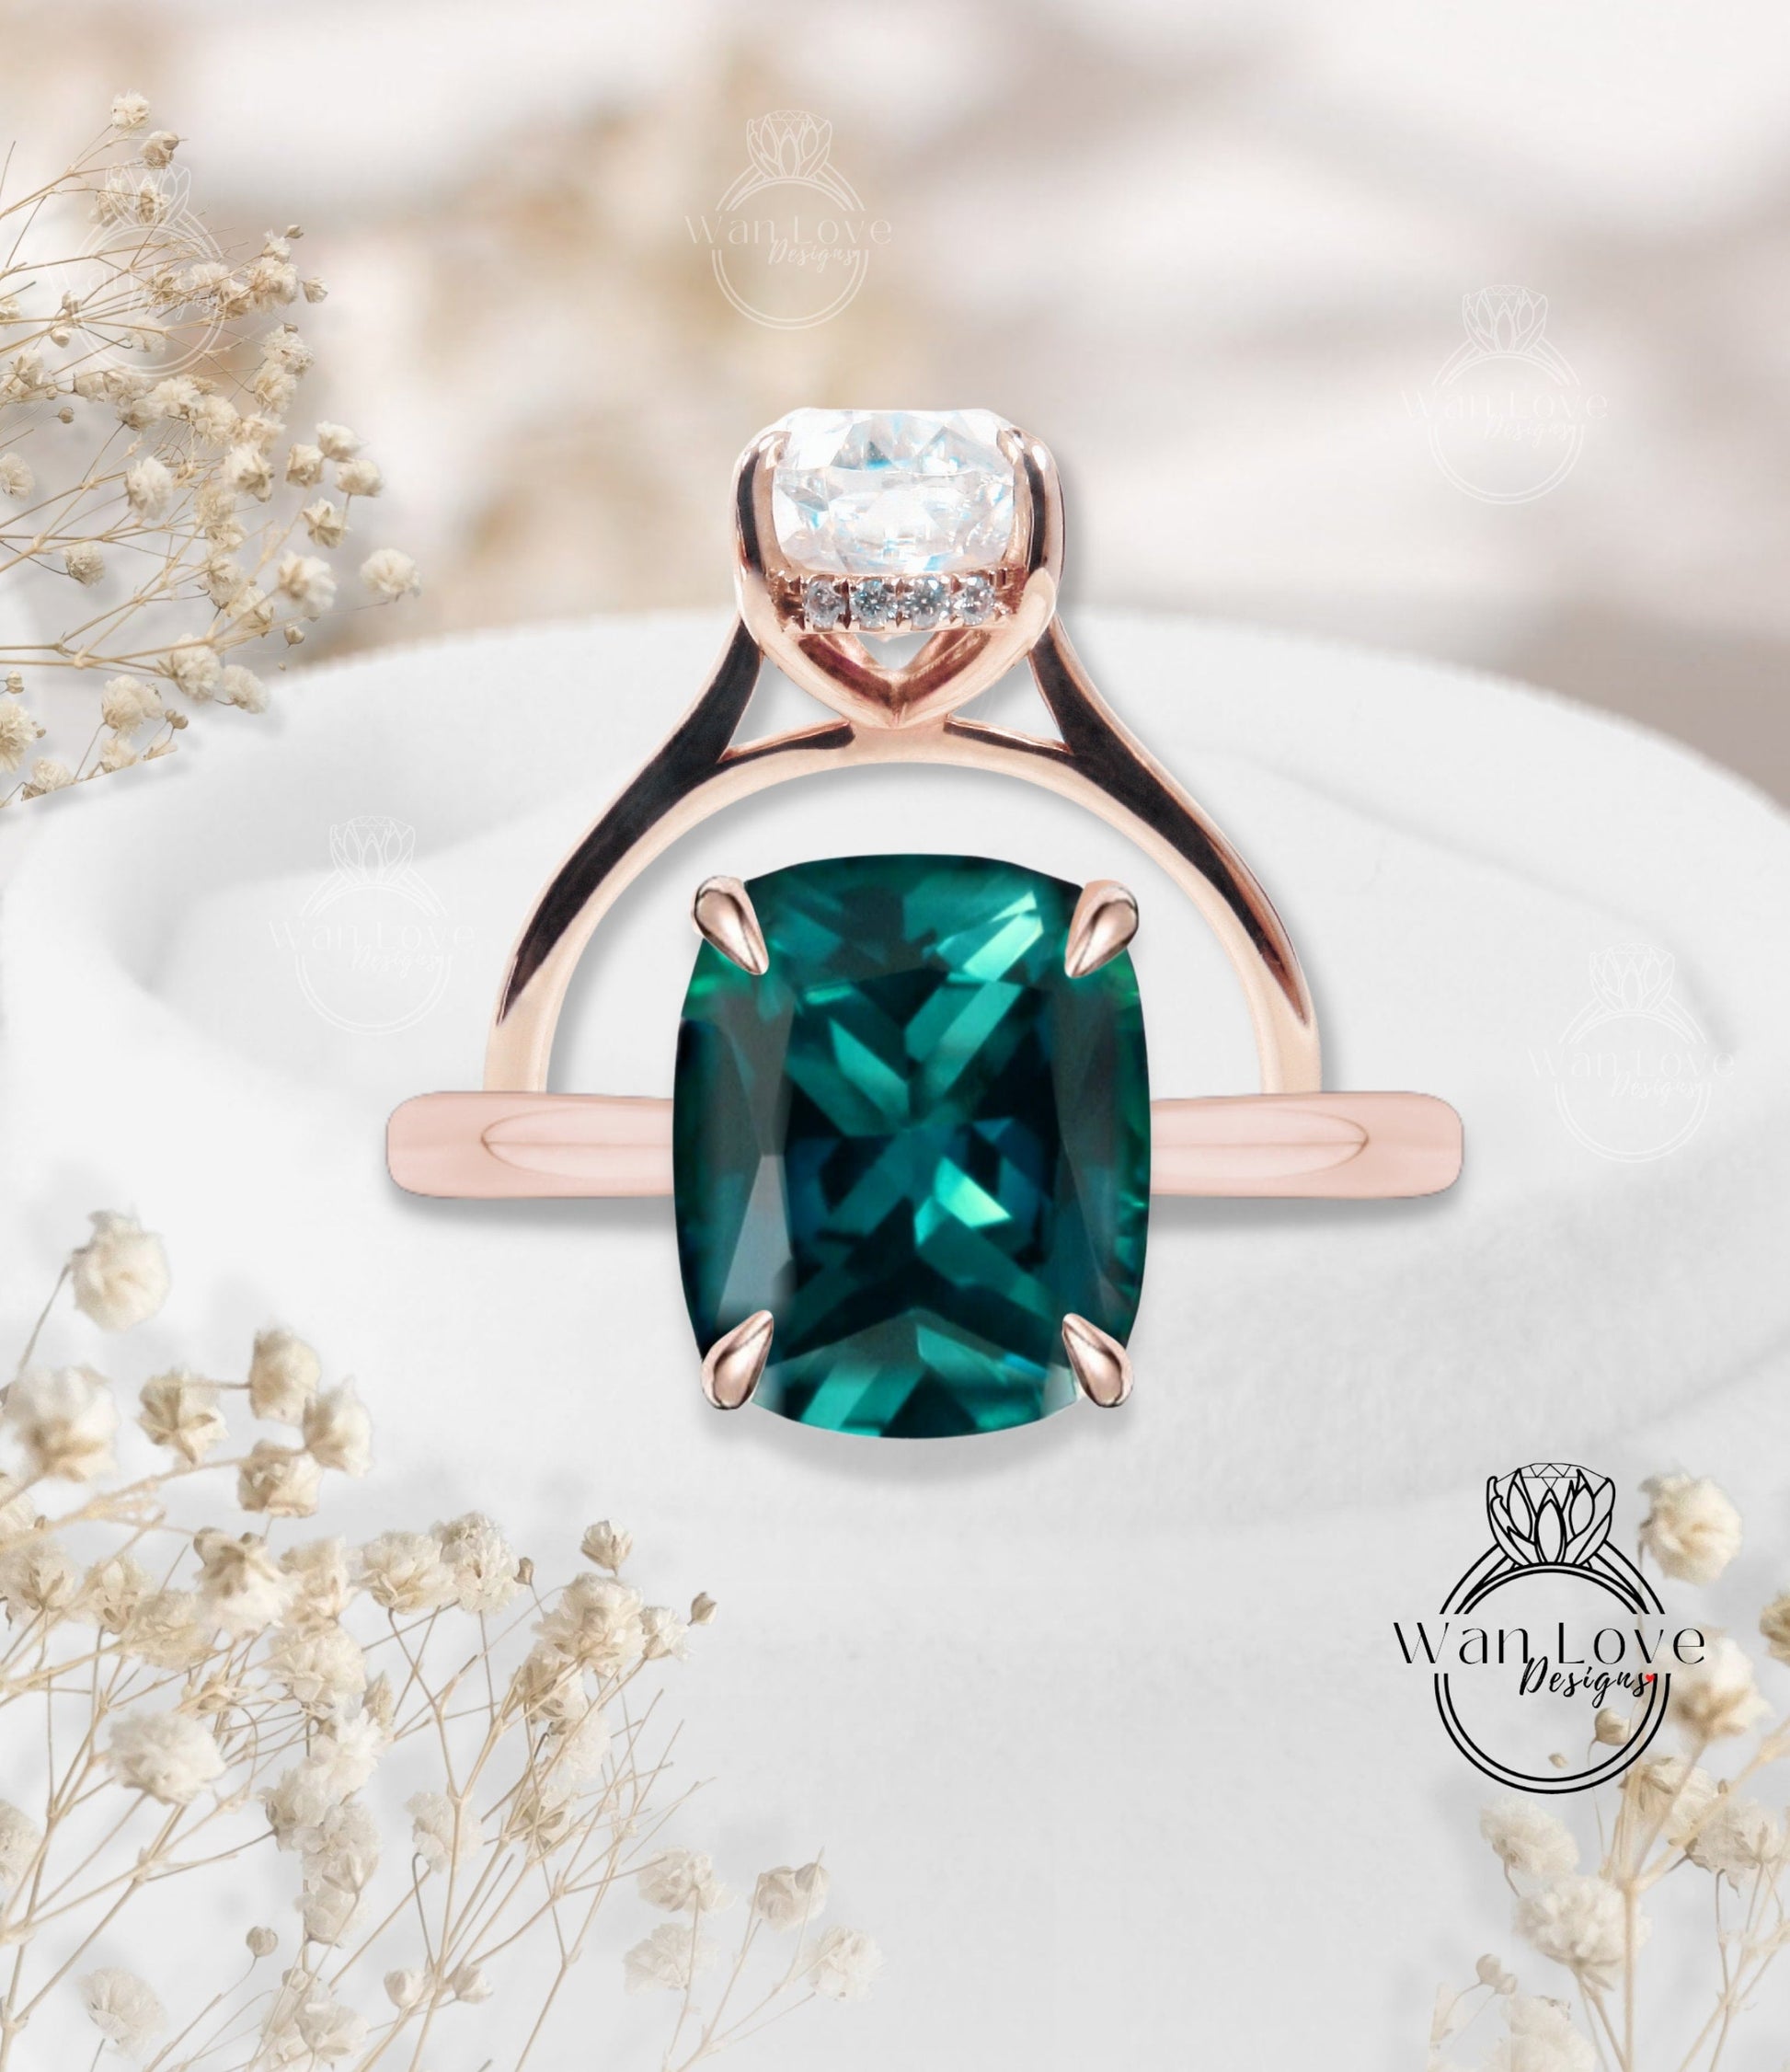 Art deco elongated cushion cut emerald engagement ring rose gold ring diamond hidden side halo ring anniversary promise bridal ring gift Wan Love Designs